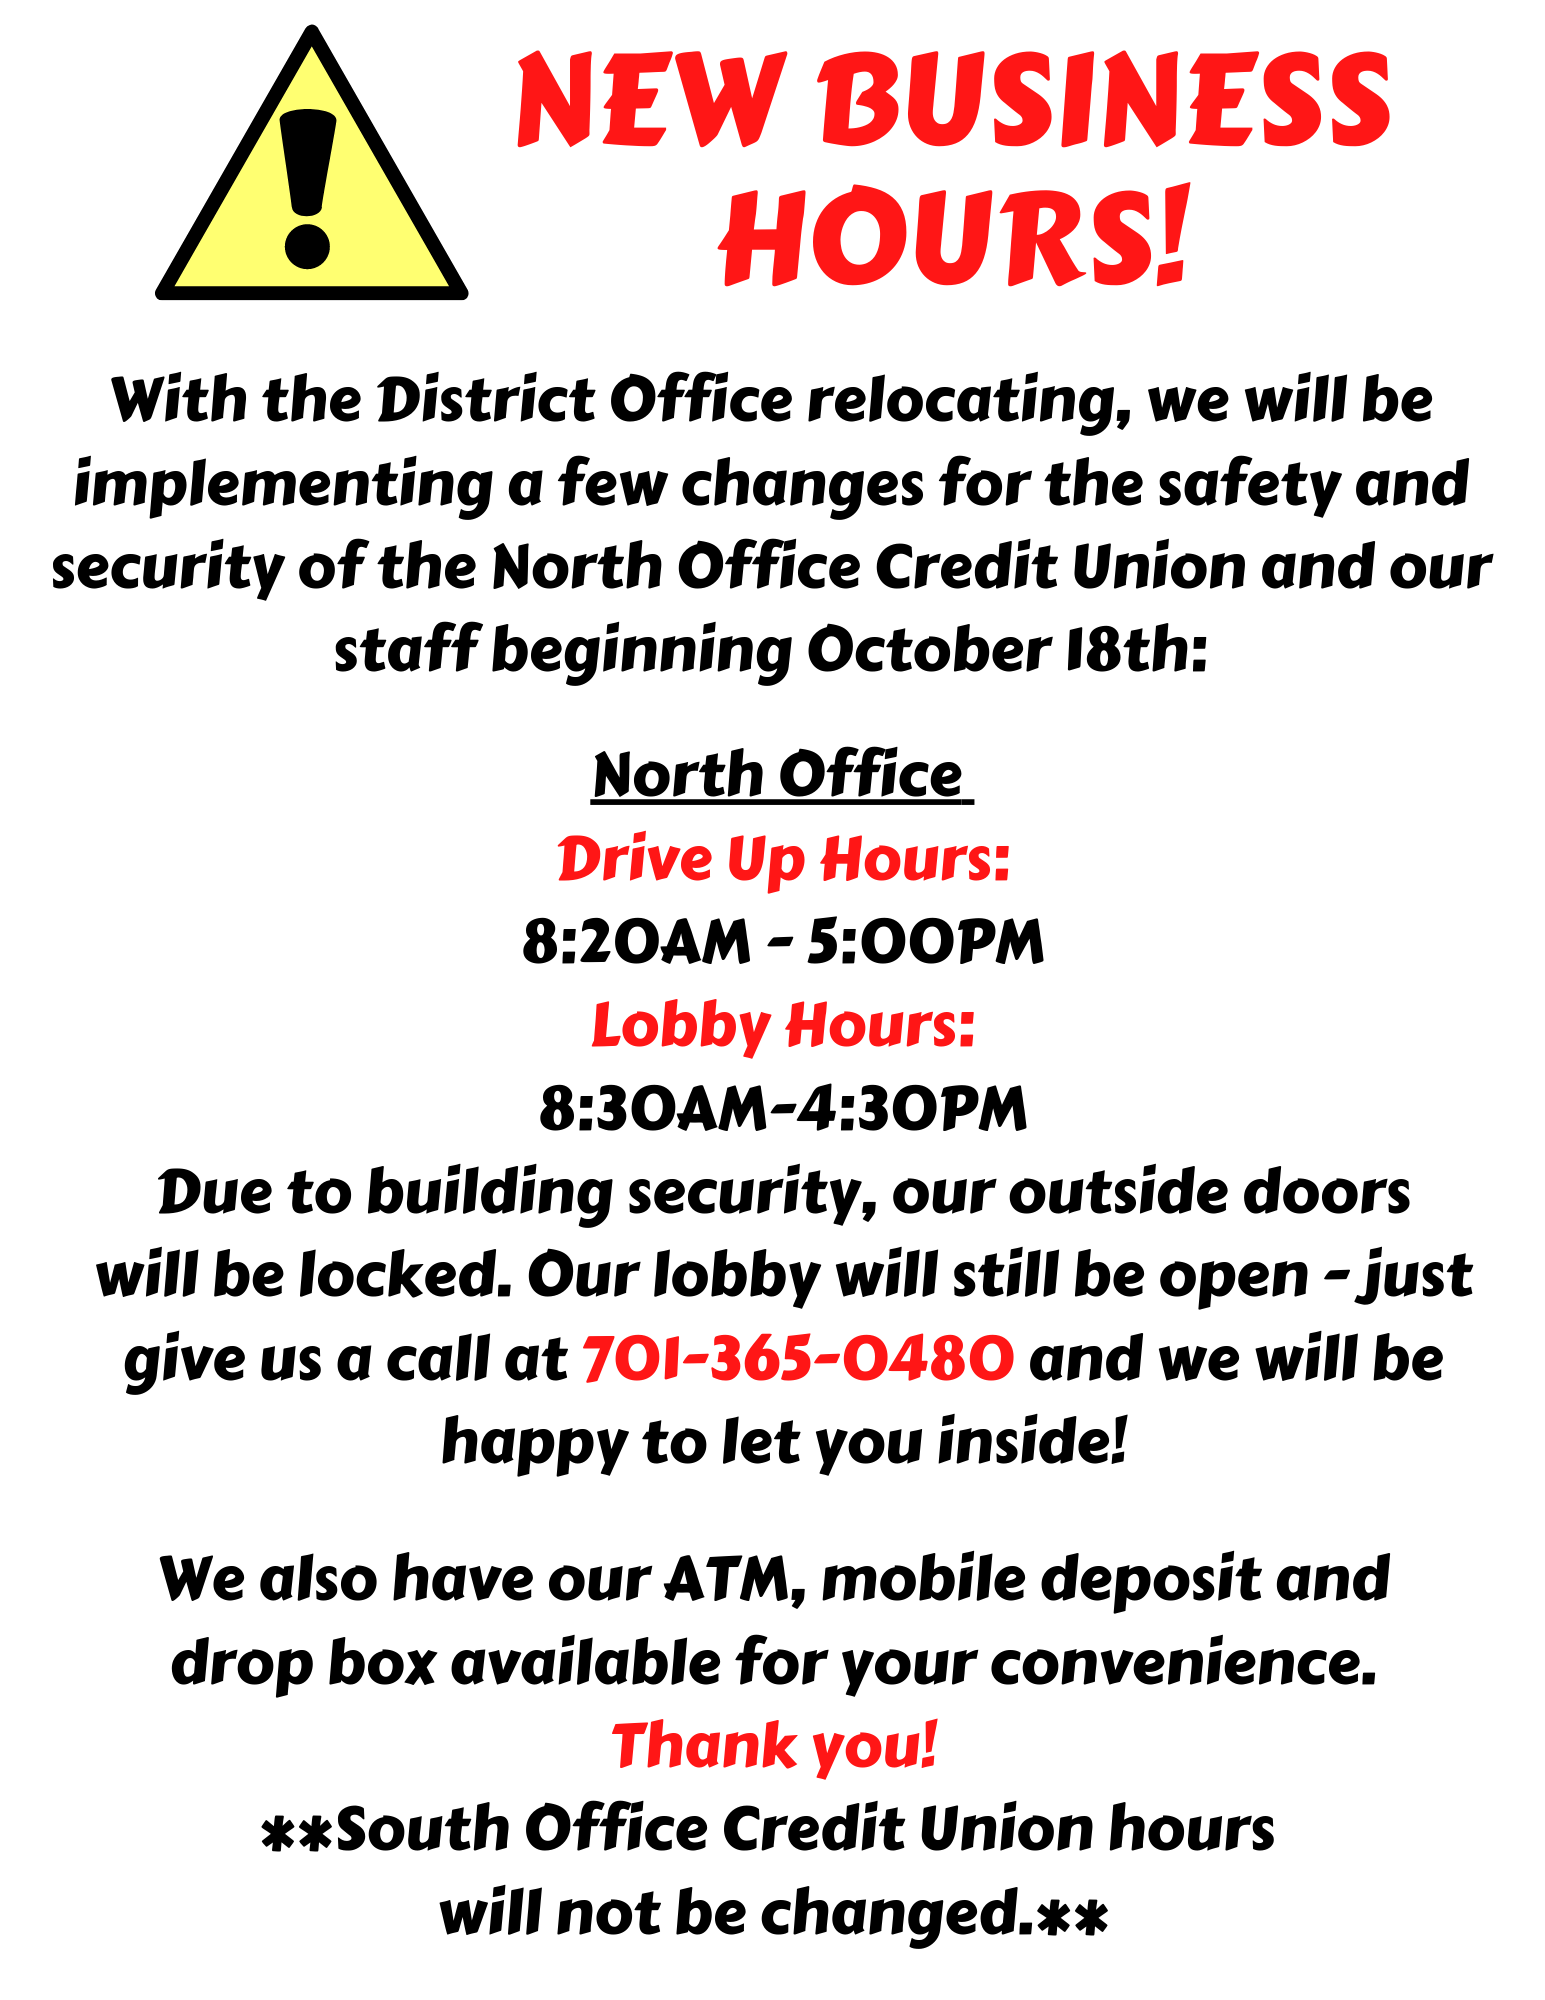 With the District Office relocating, we will be implementing a few changes for the safety and security of the North Office Credit Union and our staff beginning October 18th.  Drive up hours will be 8:20AM-5:00PM.  Lobby hours will be 8:30AM-4:30PM but due to building security, our outside doors will be locked.  Our lobby is still open - just give us a call at 701-365-0480 and we will be happy to let you inside!  South Office Credit Union hours will not be changed.